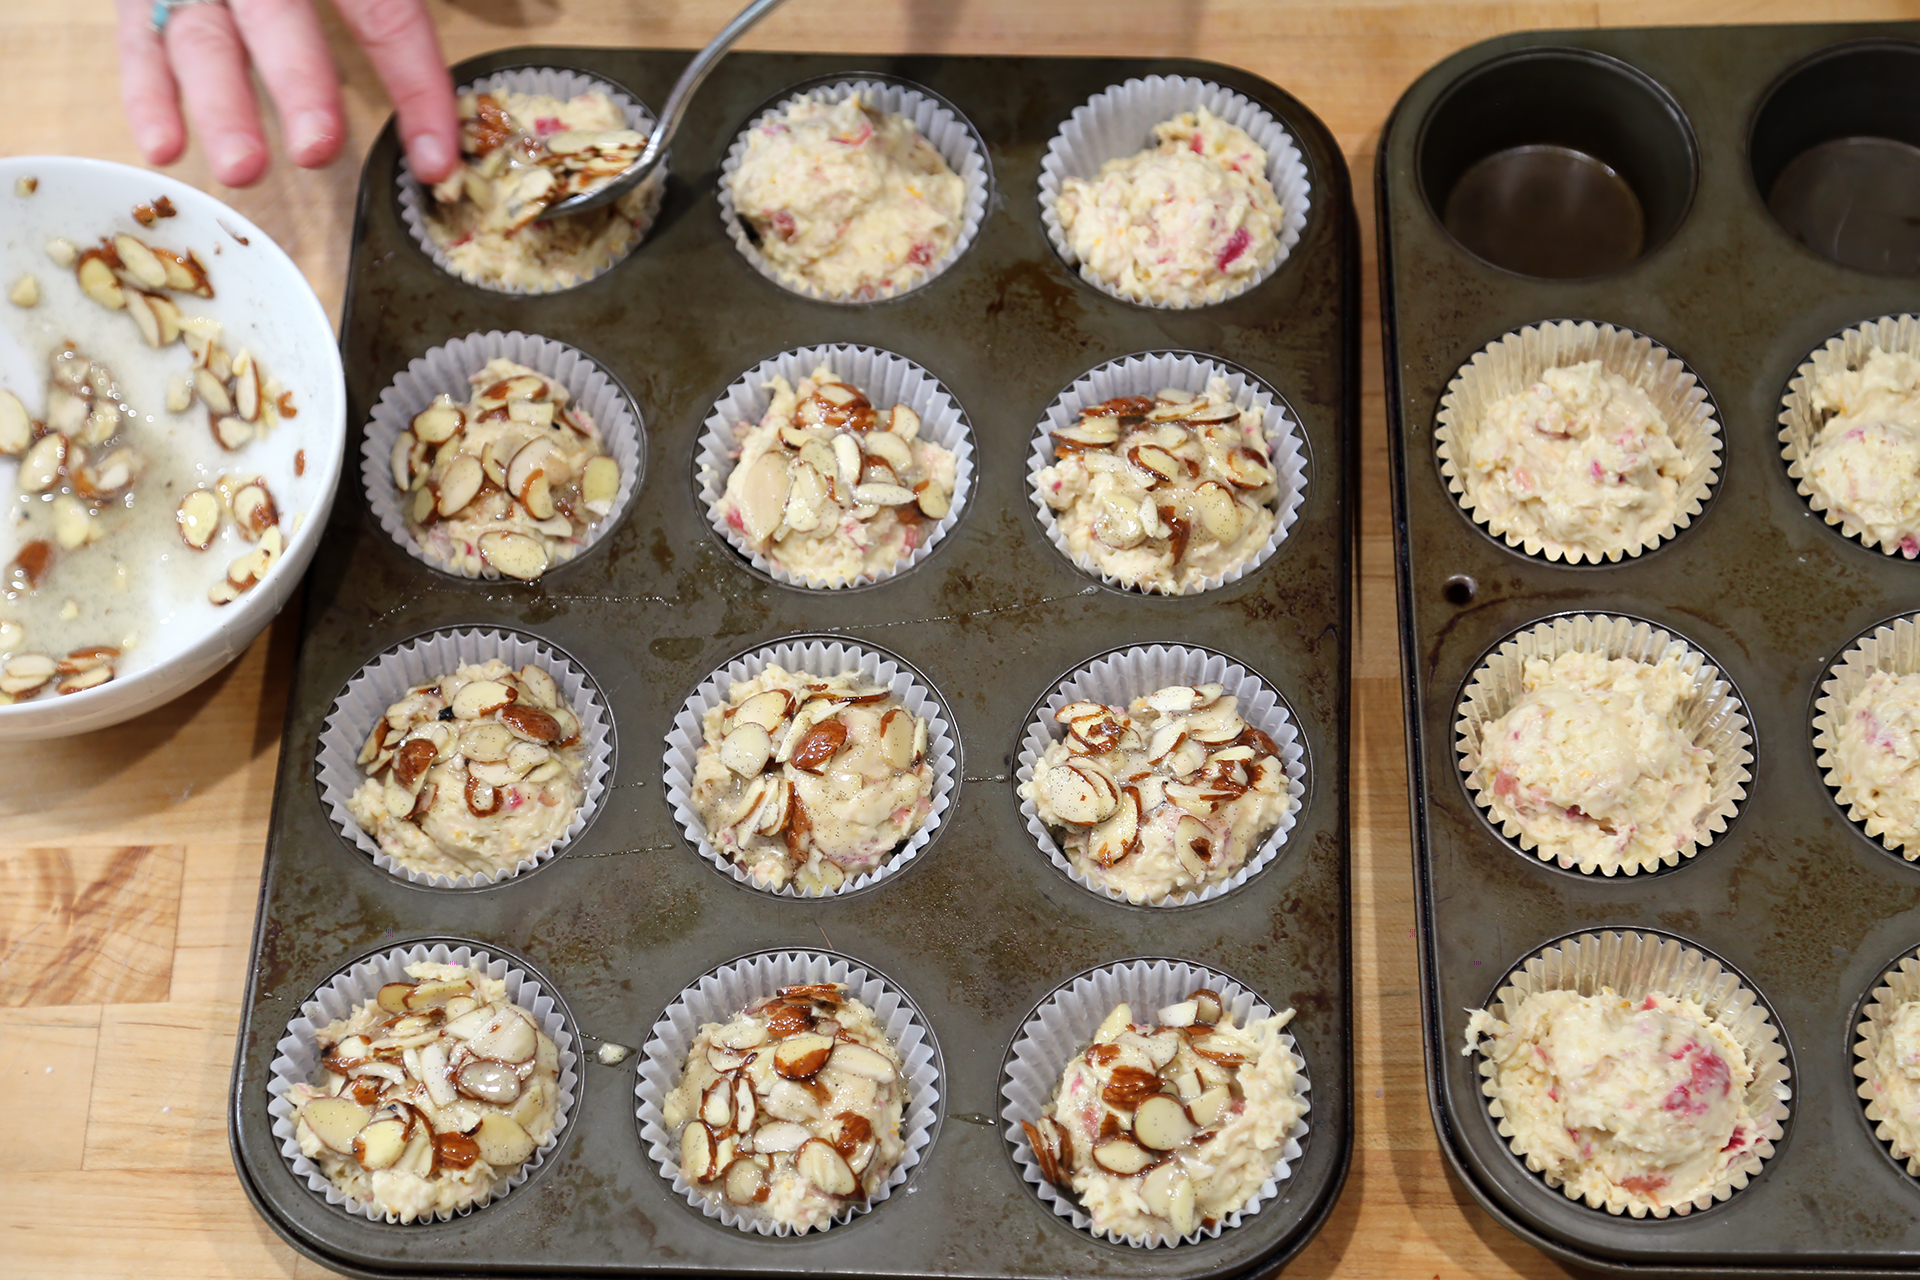 Top with almond crackle, distributing it evenly.